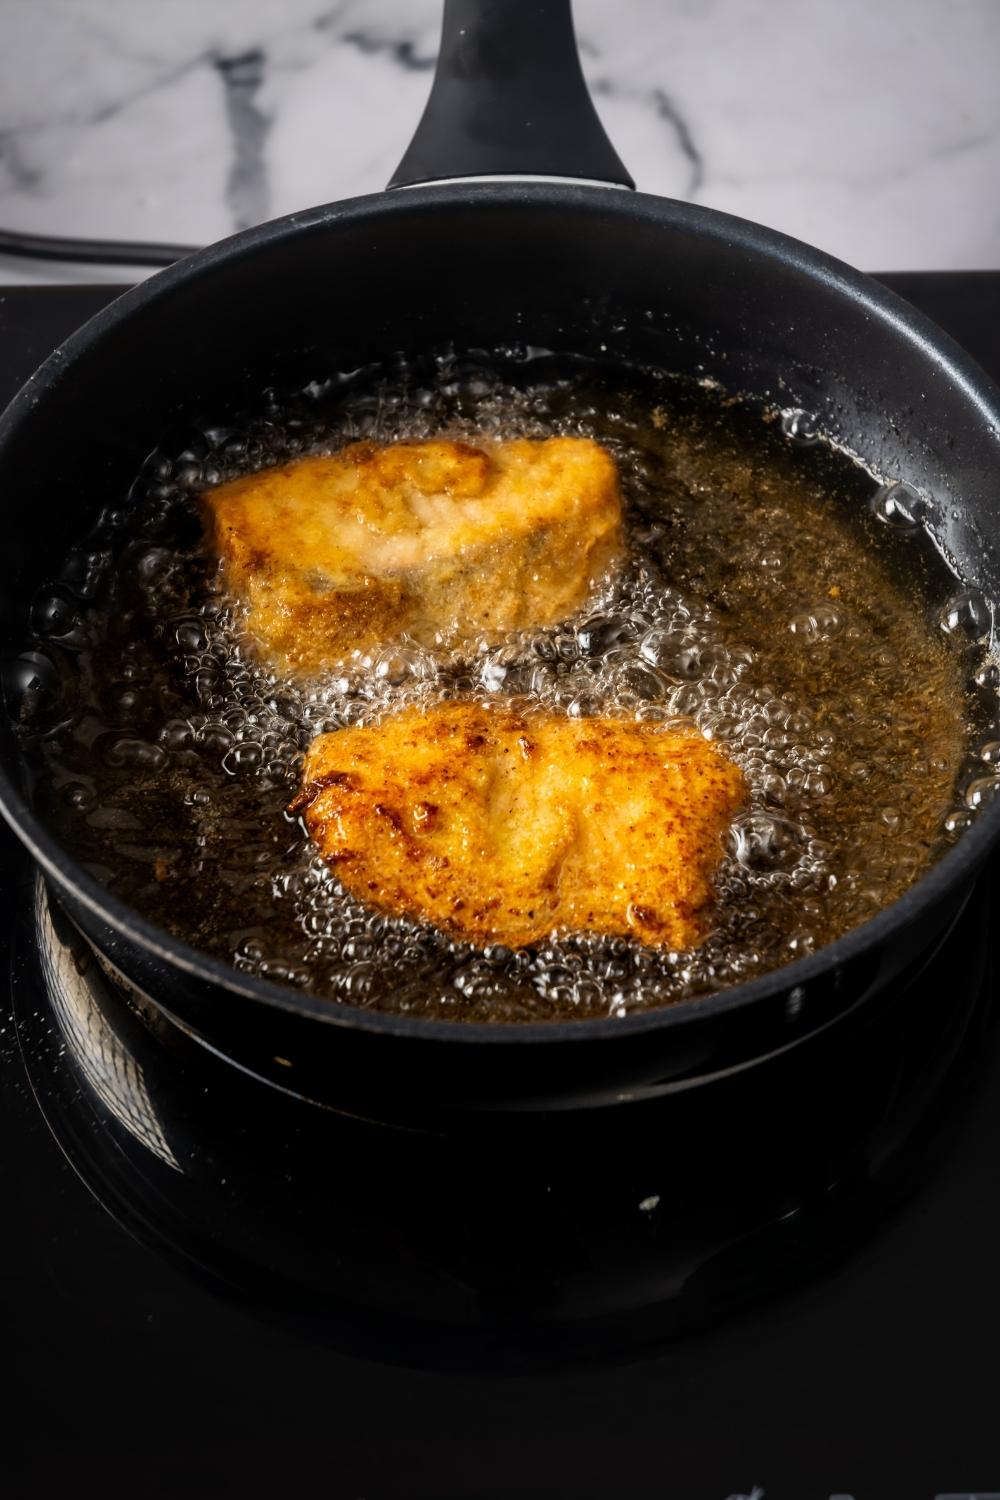 Two pieces of fried salmon in a pan that is filled with oil.